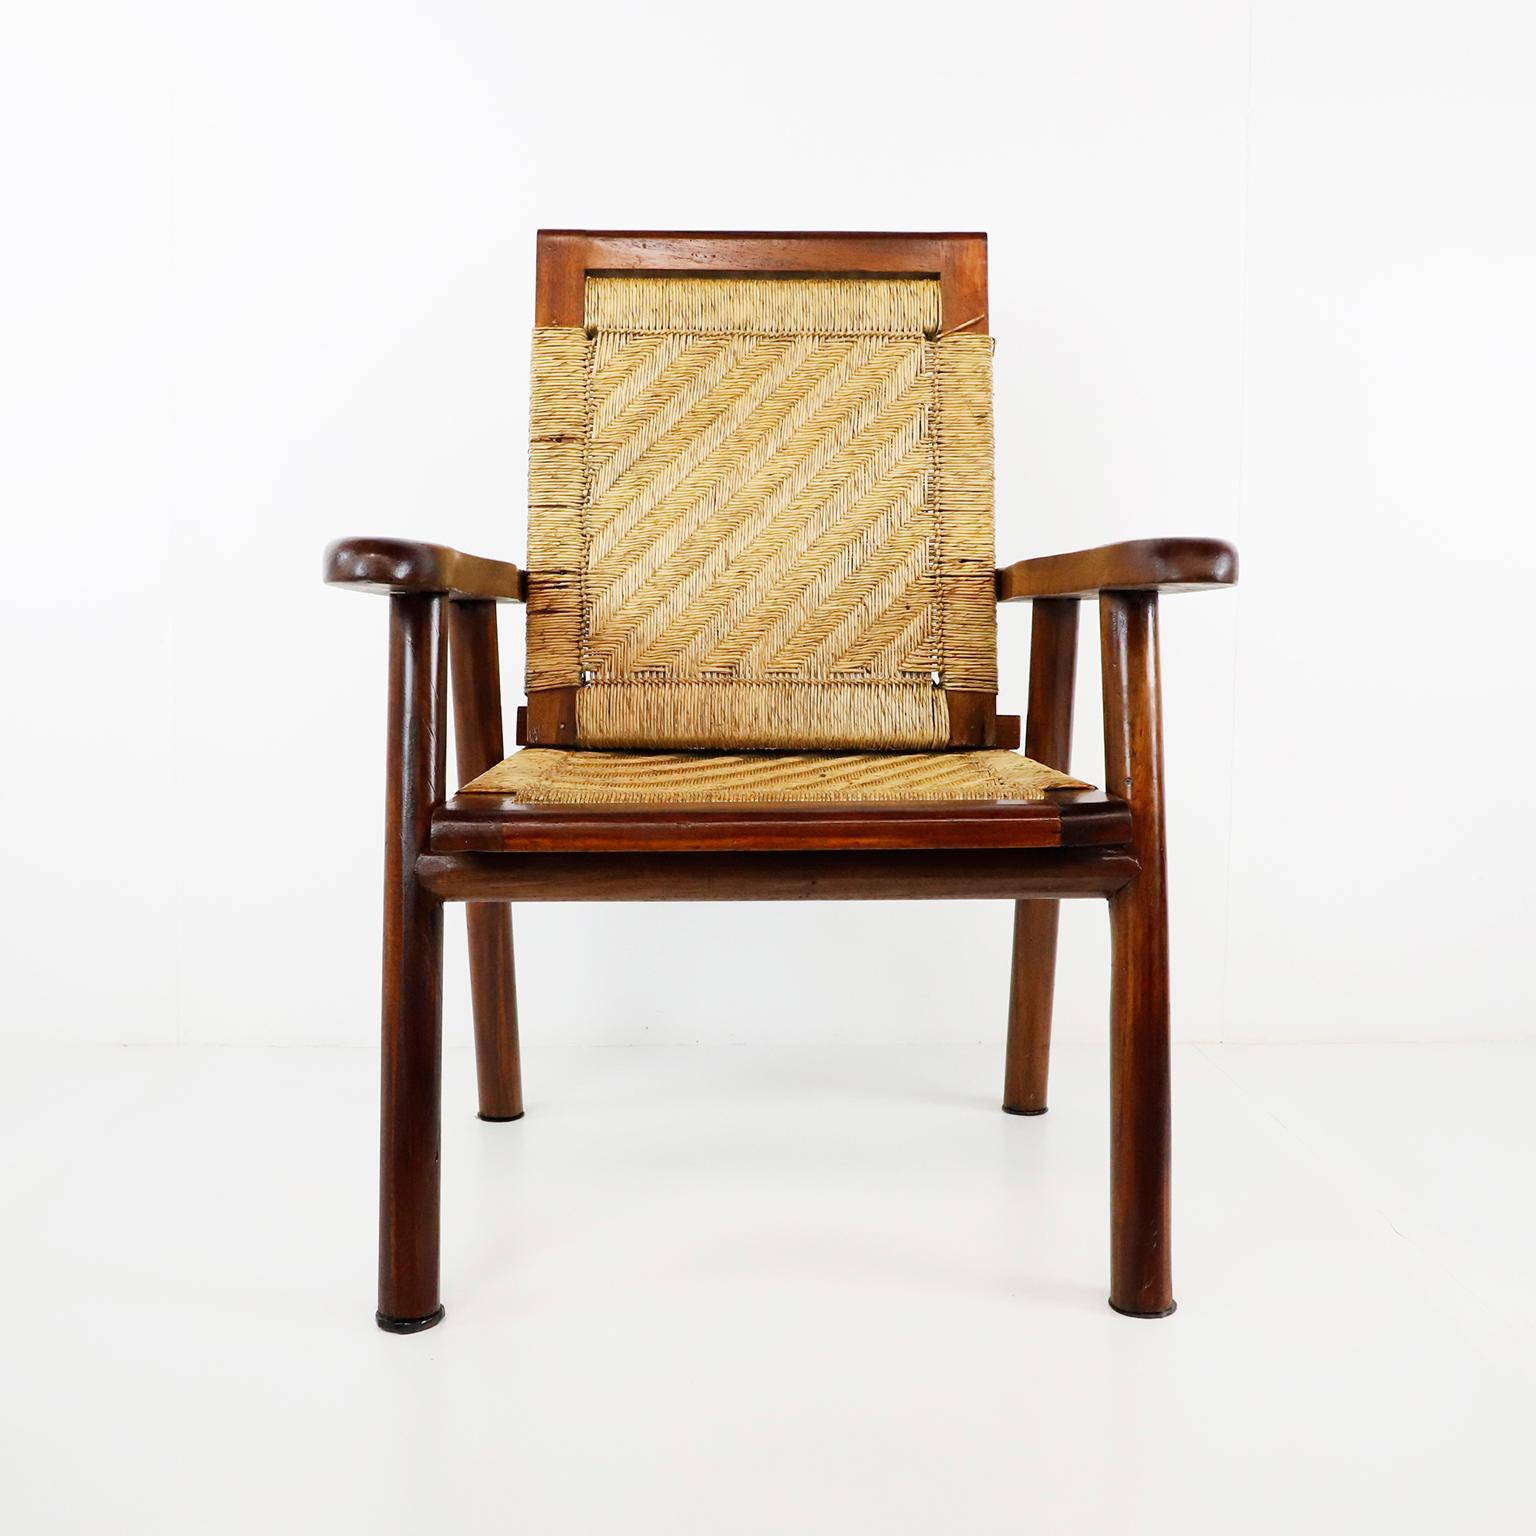 Circa 1950. We offer this Mexican woven lounge chair in the style of Clara Porset made in solid mahogany. This armchair provides a surprising amount of comfort with its beautifully woven seat. The chair is in great vintage condition and recently